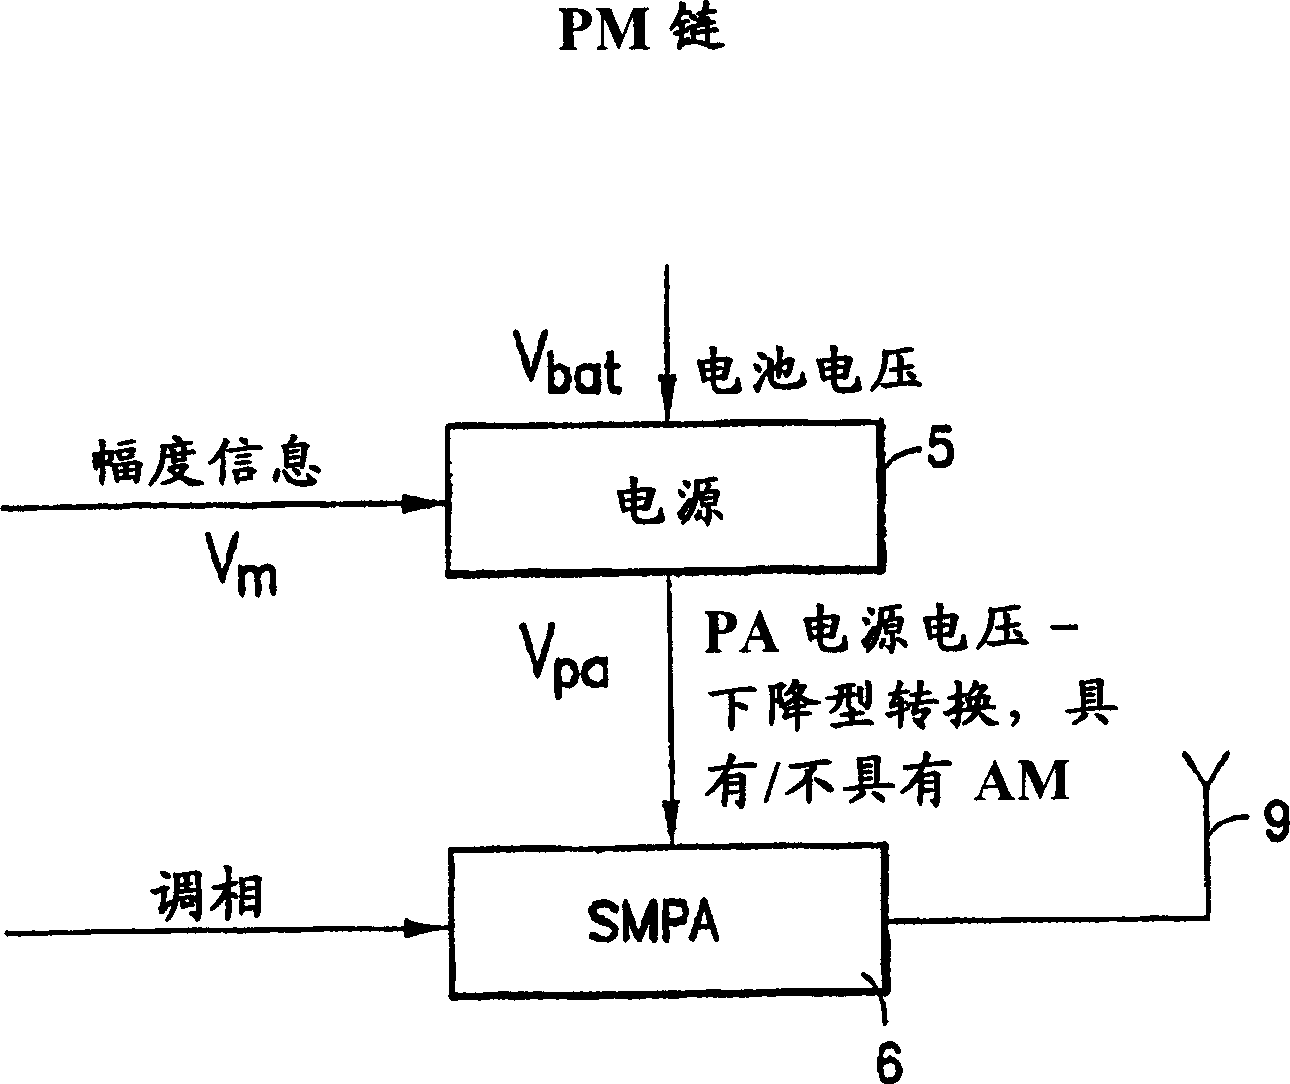 Hybrid switched mode/linear power amplifier power supply for use in polar transmitter